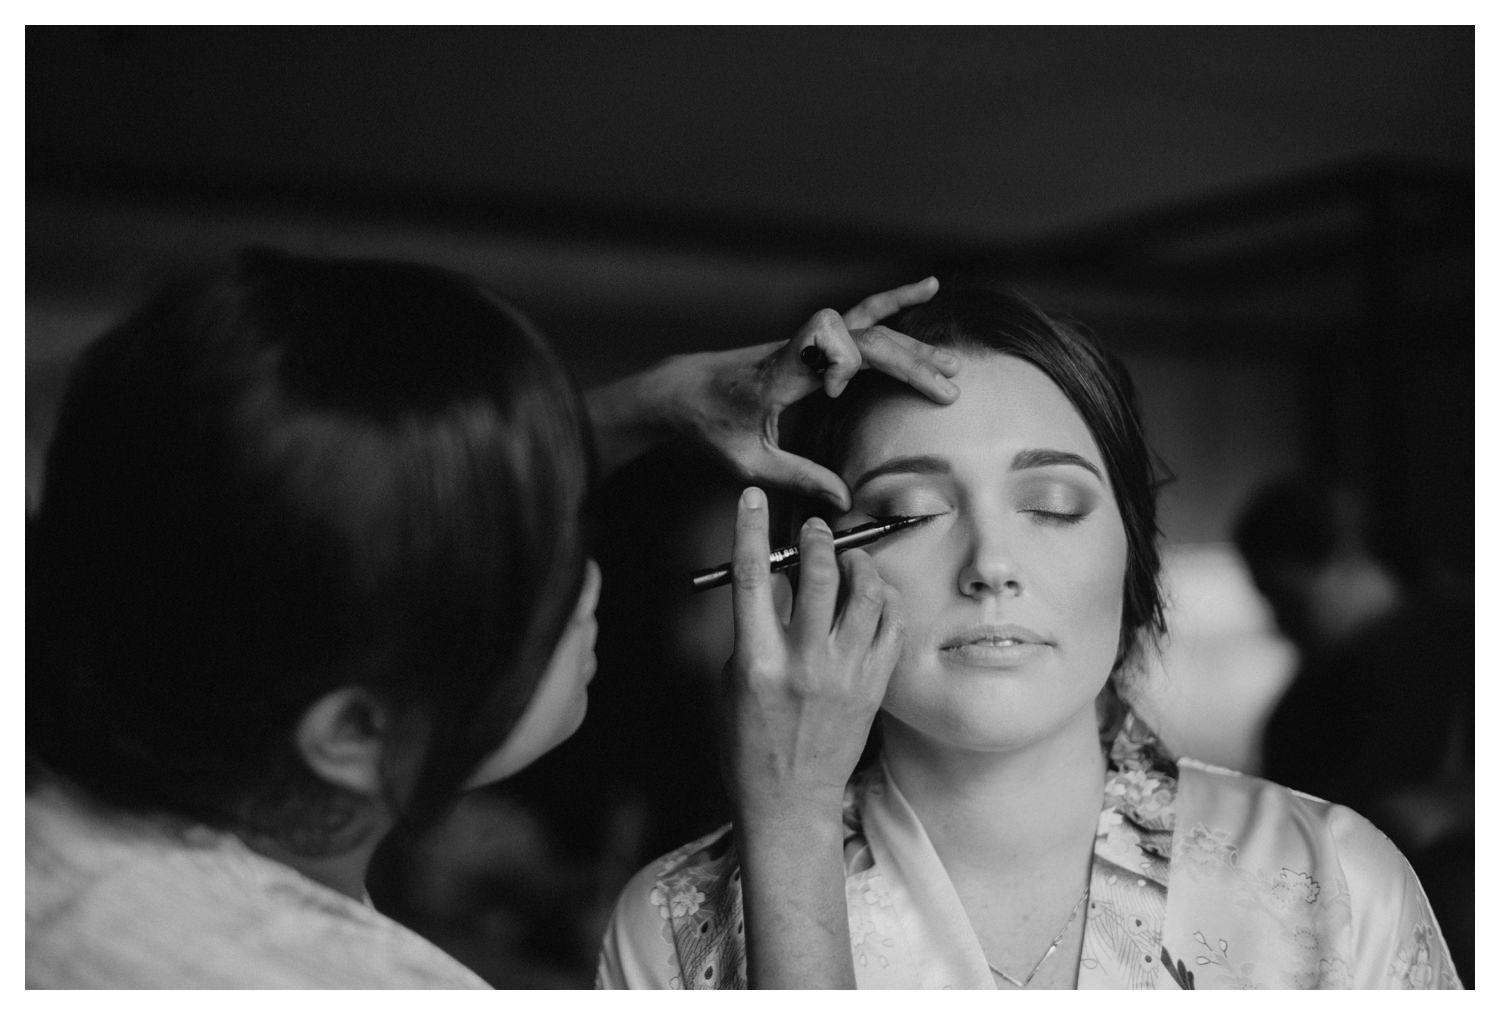 The bride has her make-up applied on her wedding day